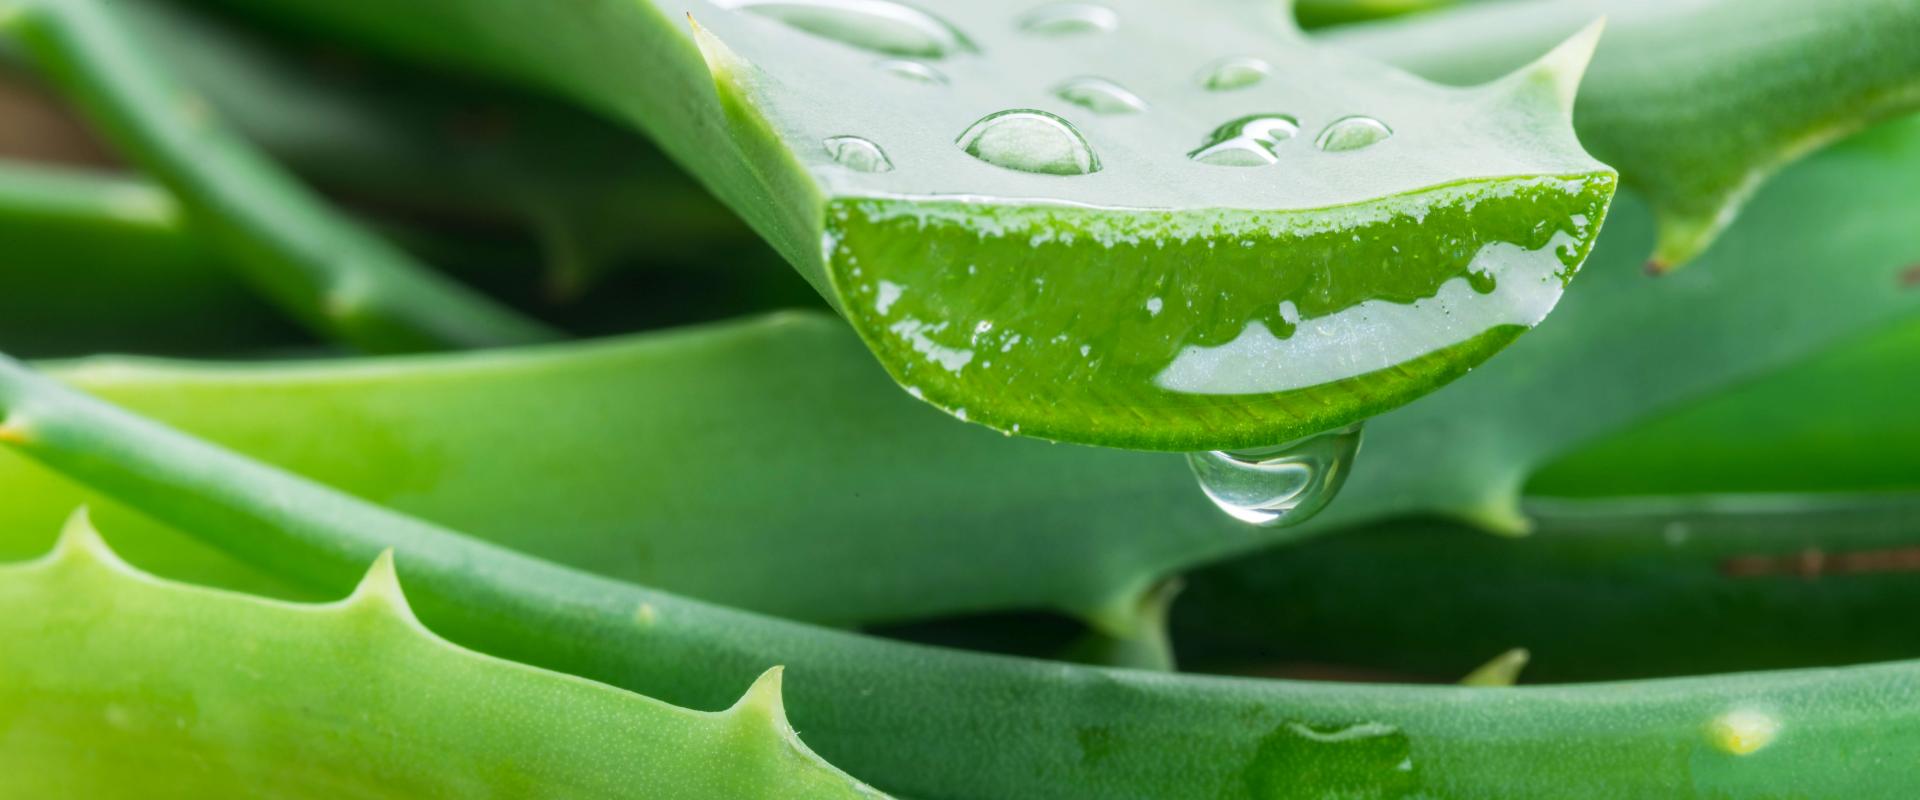 Aloe vera - Ingredient | Inside Our Products - L’Oréal